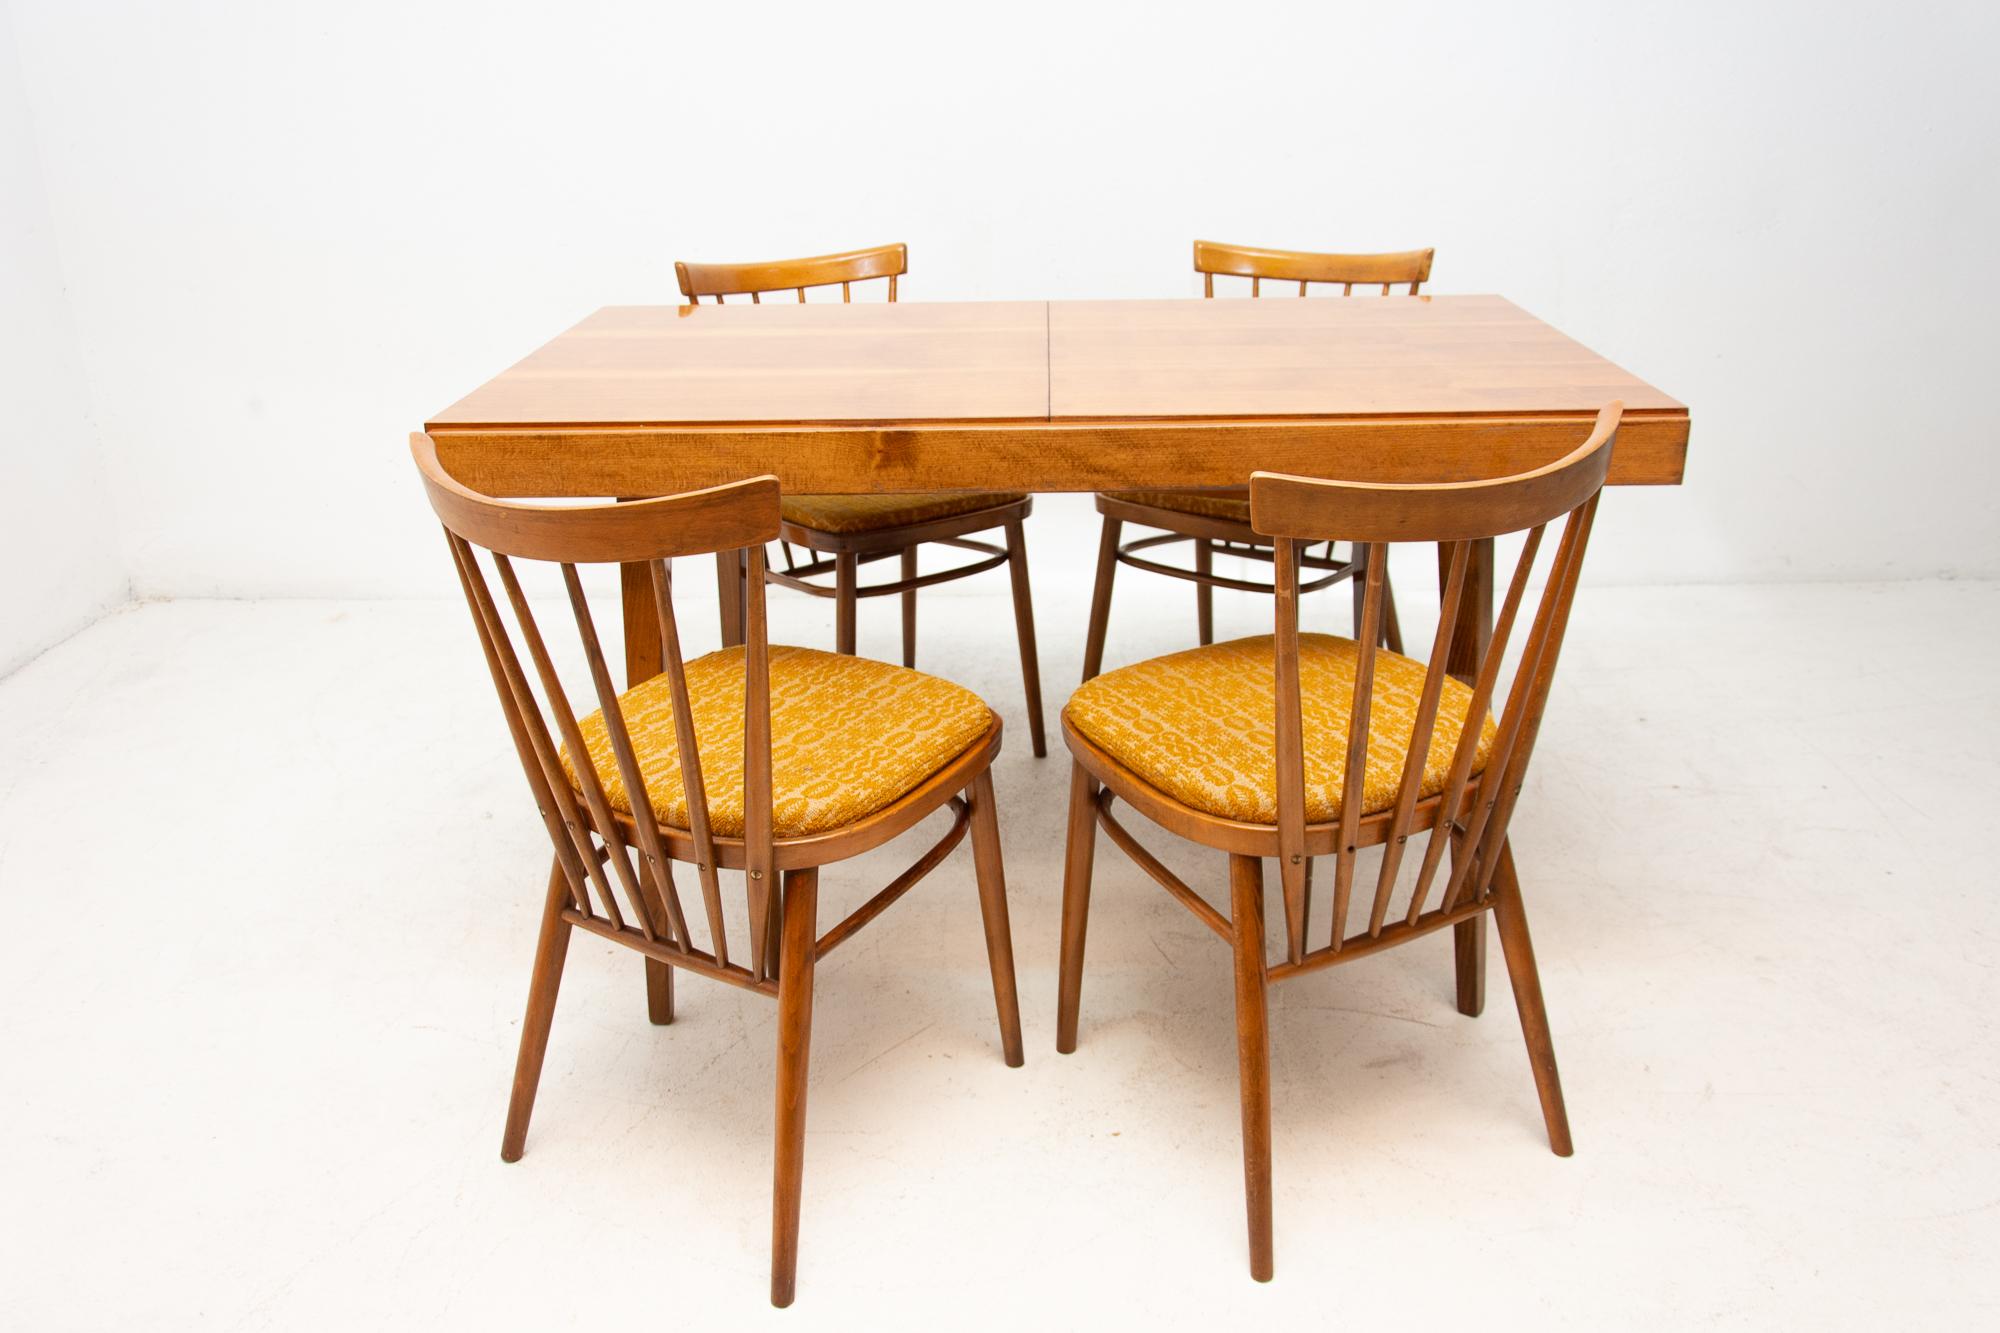 Czech Midcentury Dining Chairs Designed by J. Kobylka, 1960s, Set of Four